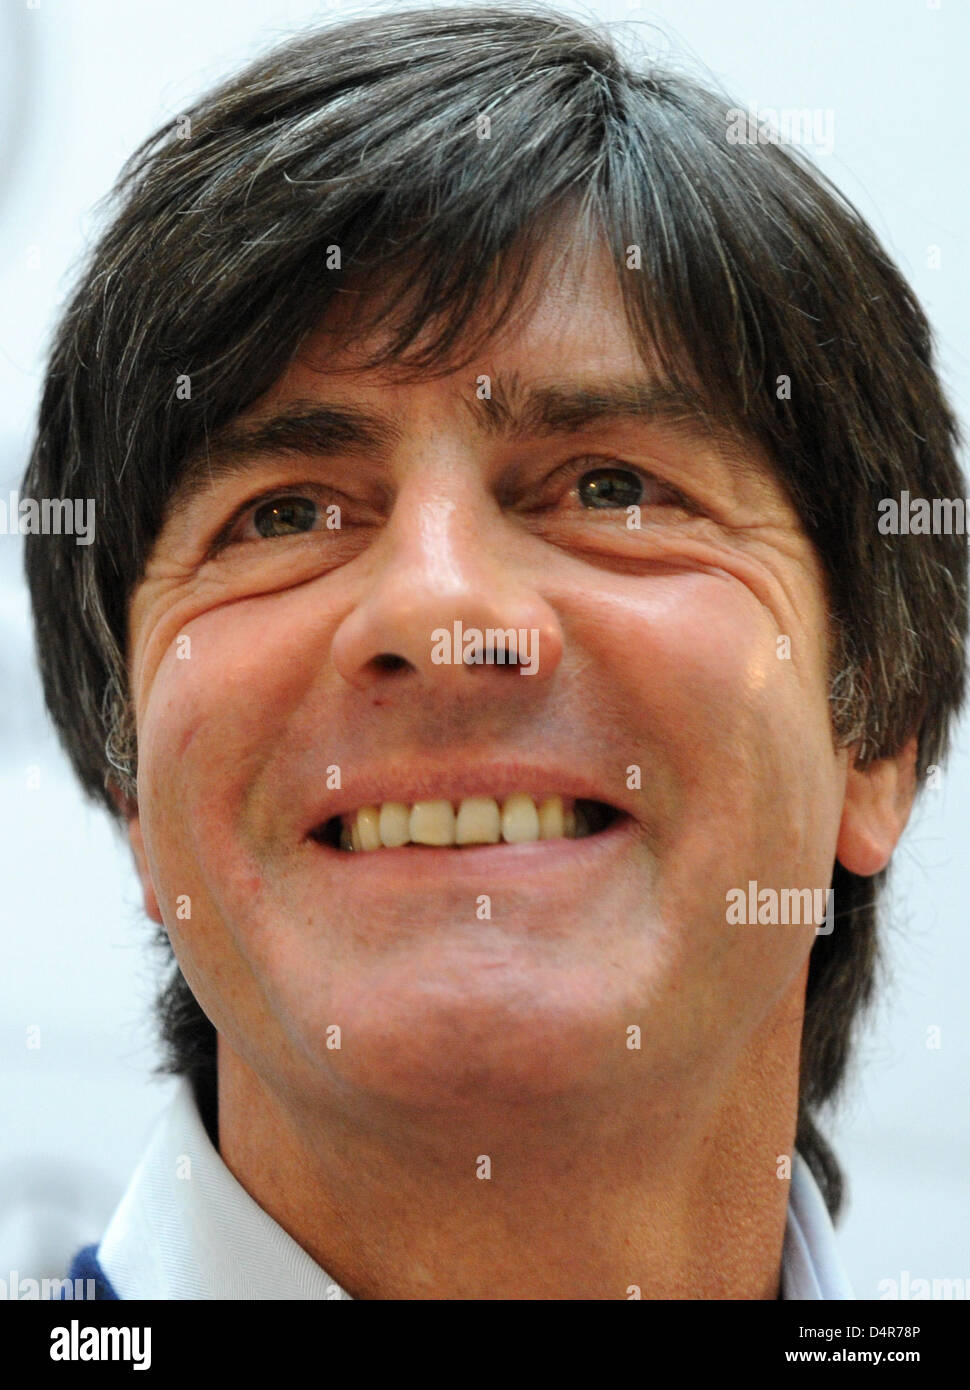 Germany head coach Joachim Loew smiles during a press conference of the German national team in Moscow, Russia, 09 October 2009. The German team faces Russia?s squad for a crucial FIFA 2010 World Cup qualifier on 10 October to be held on artificial turf at Luzhniki stadium of Moscow. Phhoto: Marcus Brandt Stock Photo